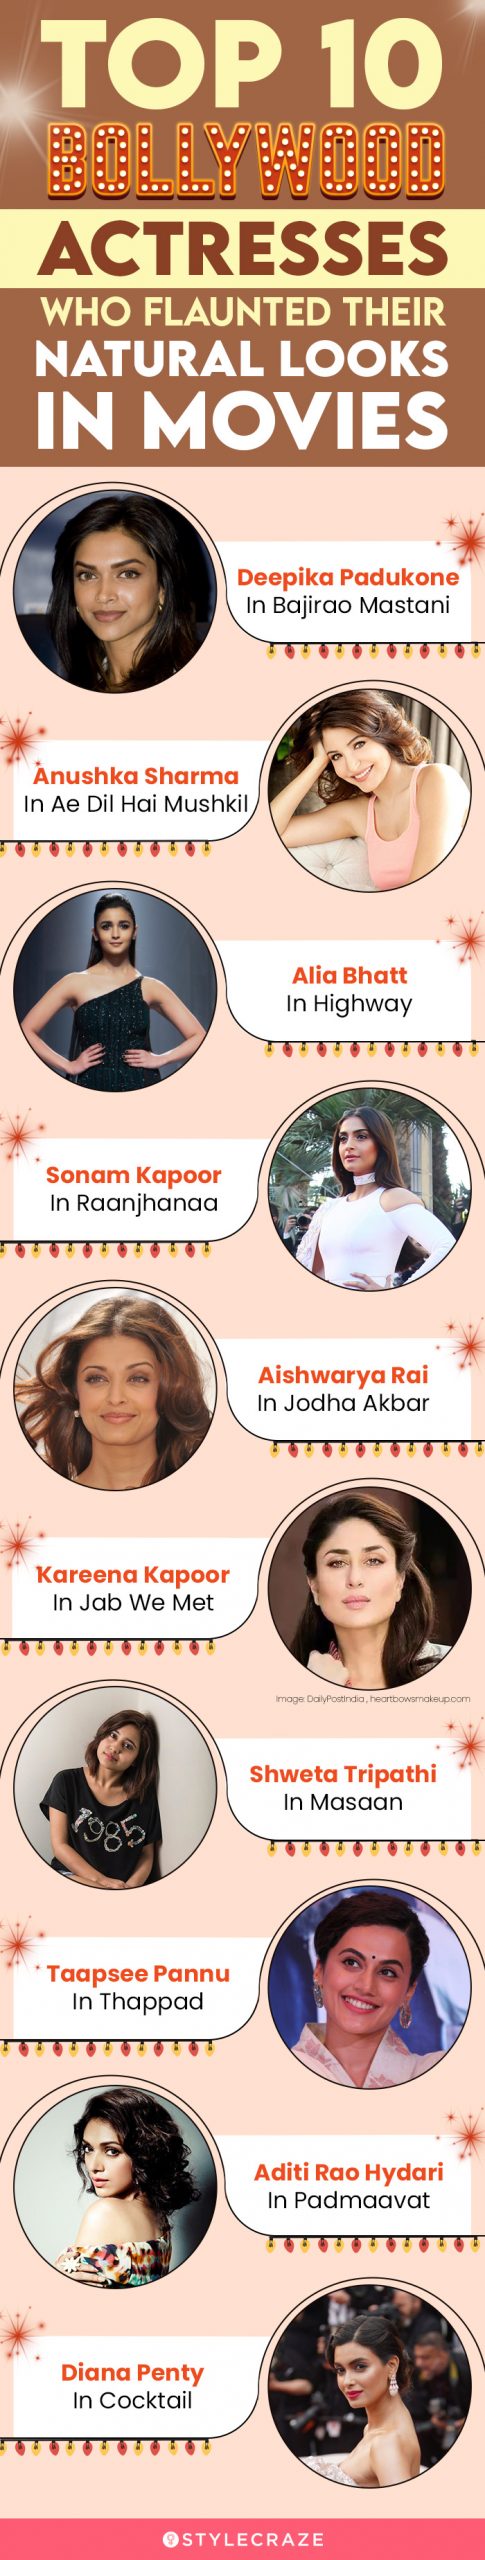 top 10 bollywood actresses who flaunted their natural looks in movies (infographic)